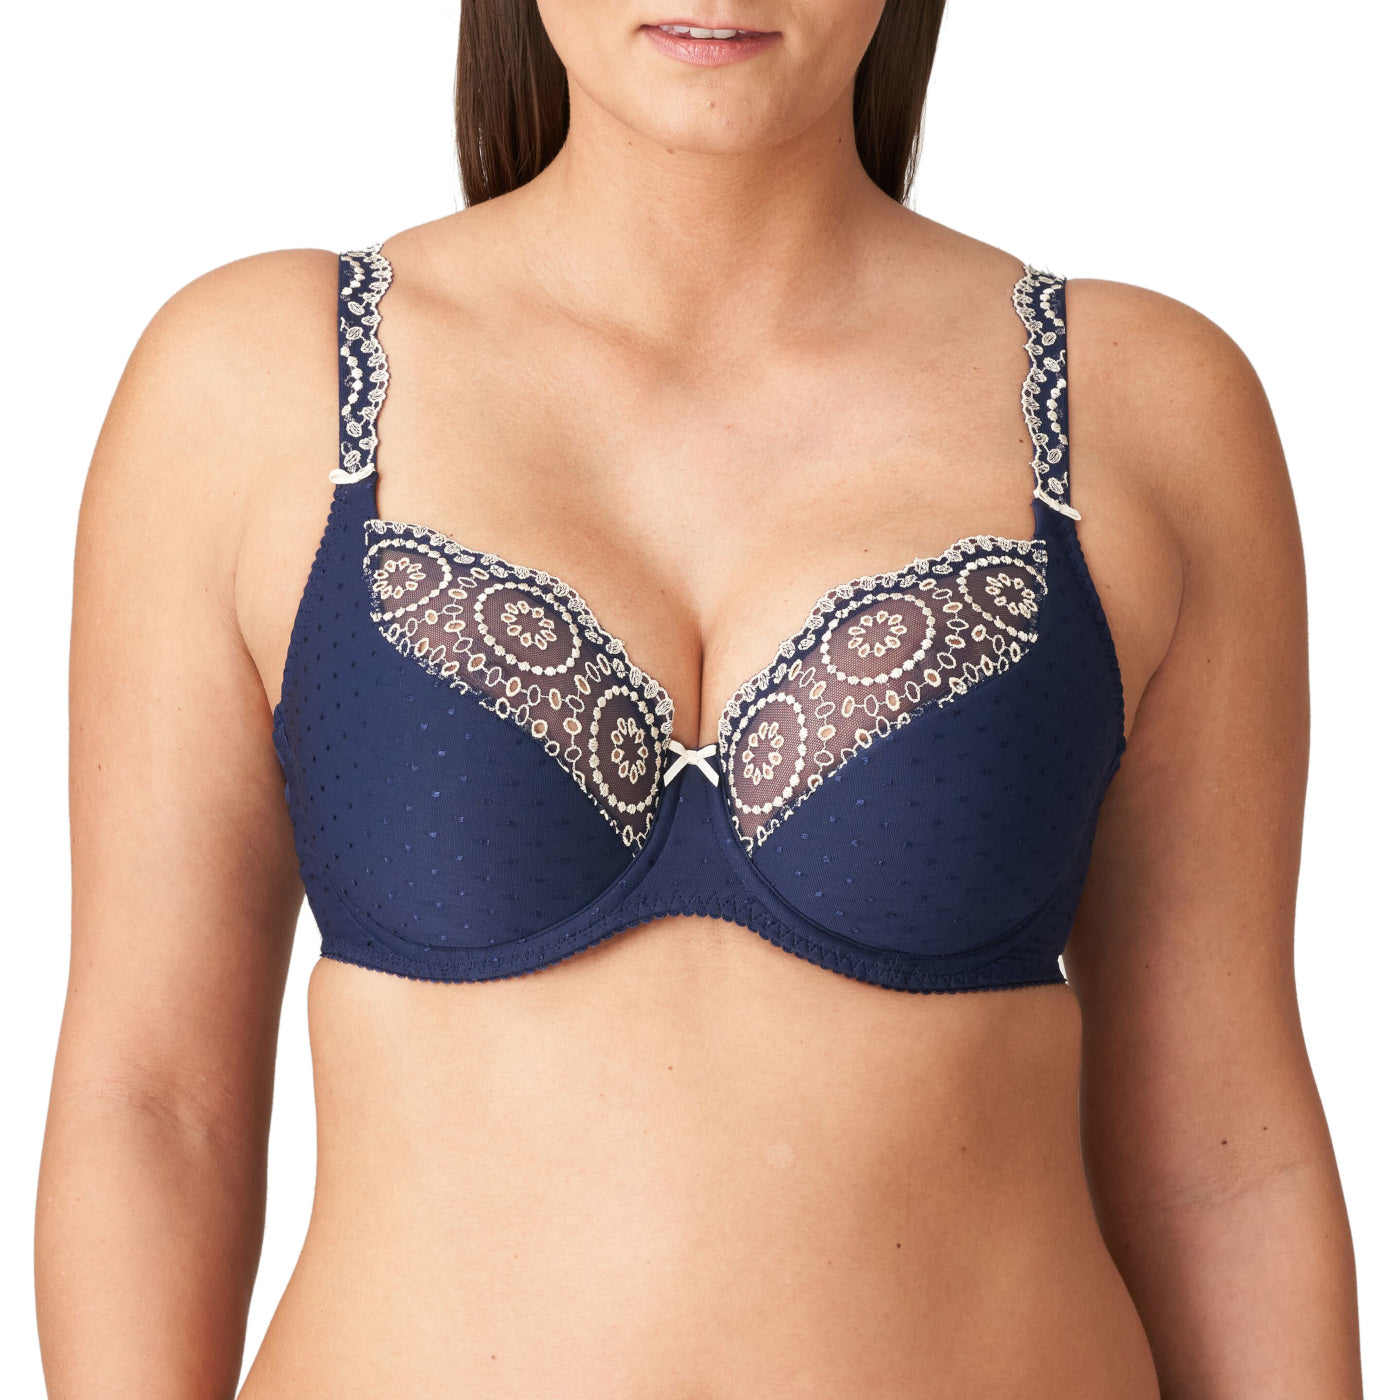 2027-4 Women's Marine Floral Non-padded Underwired Full Cup Bra